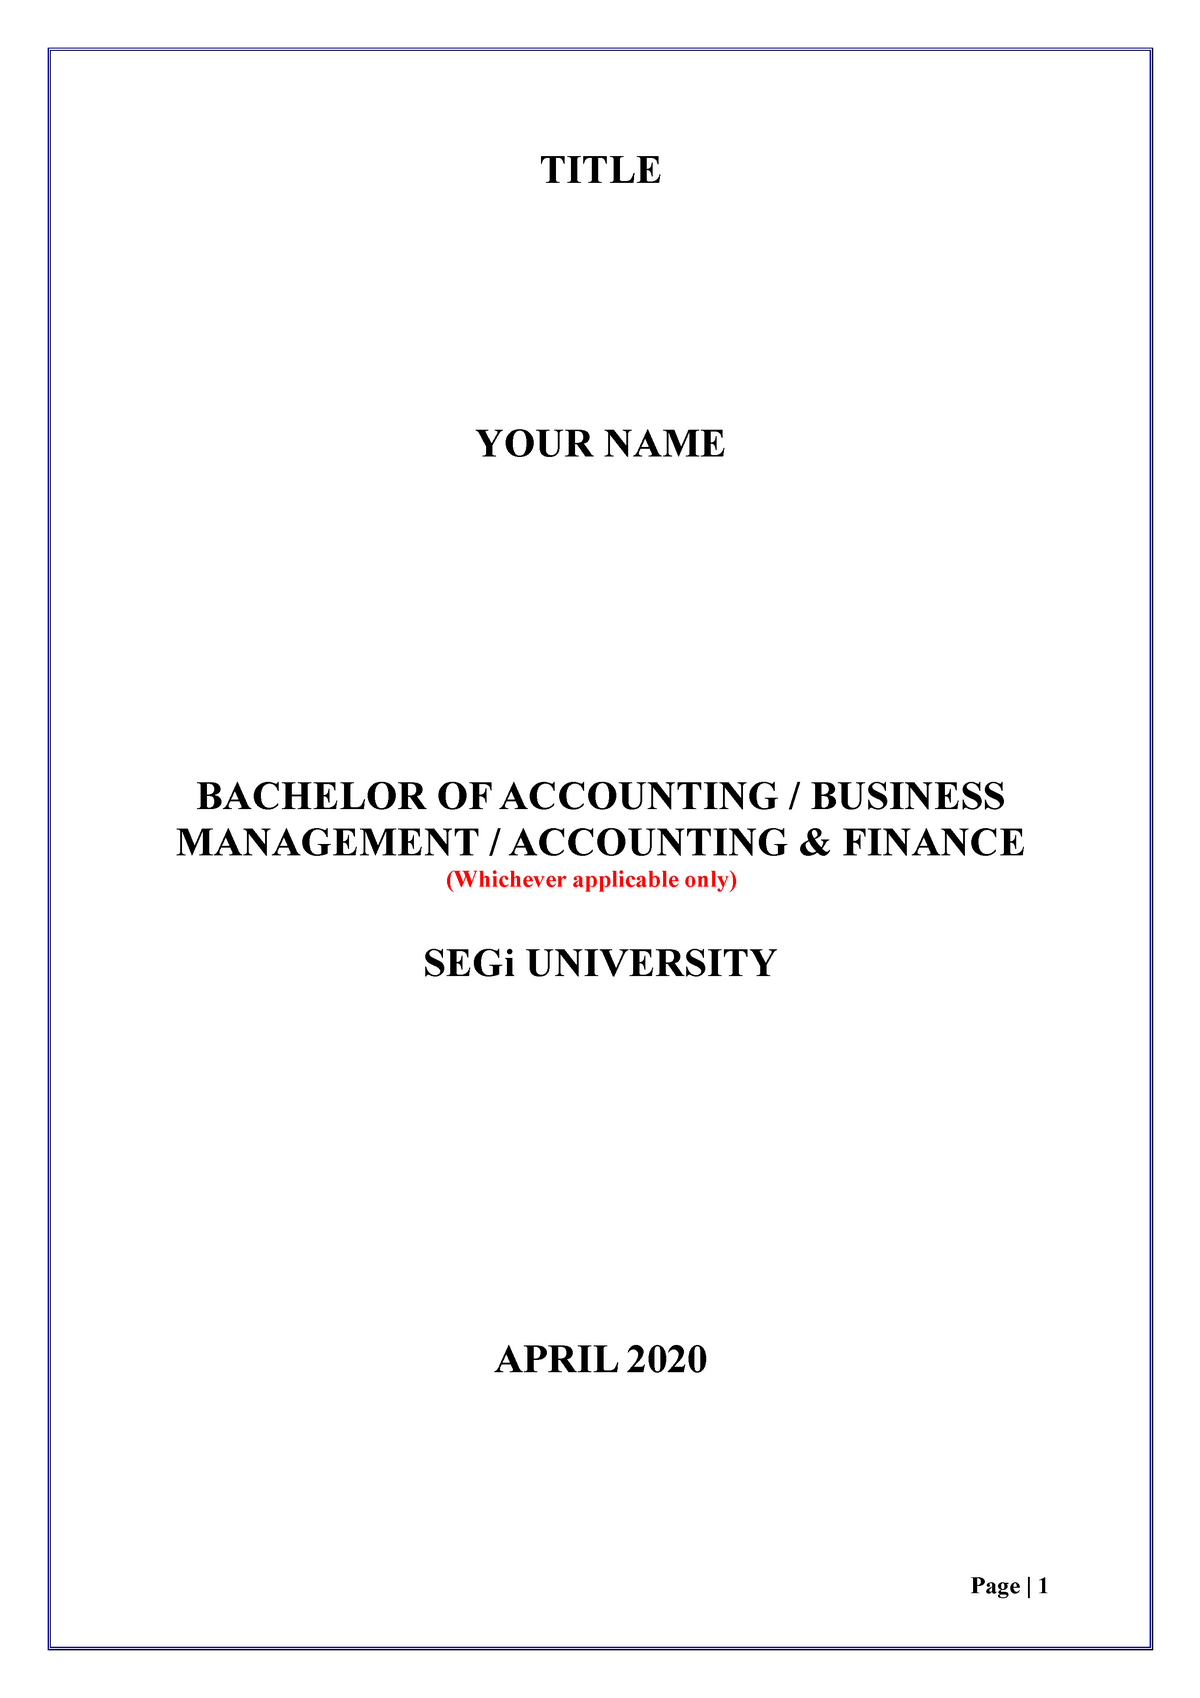 research proposal title for accounting